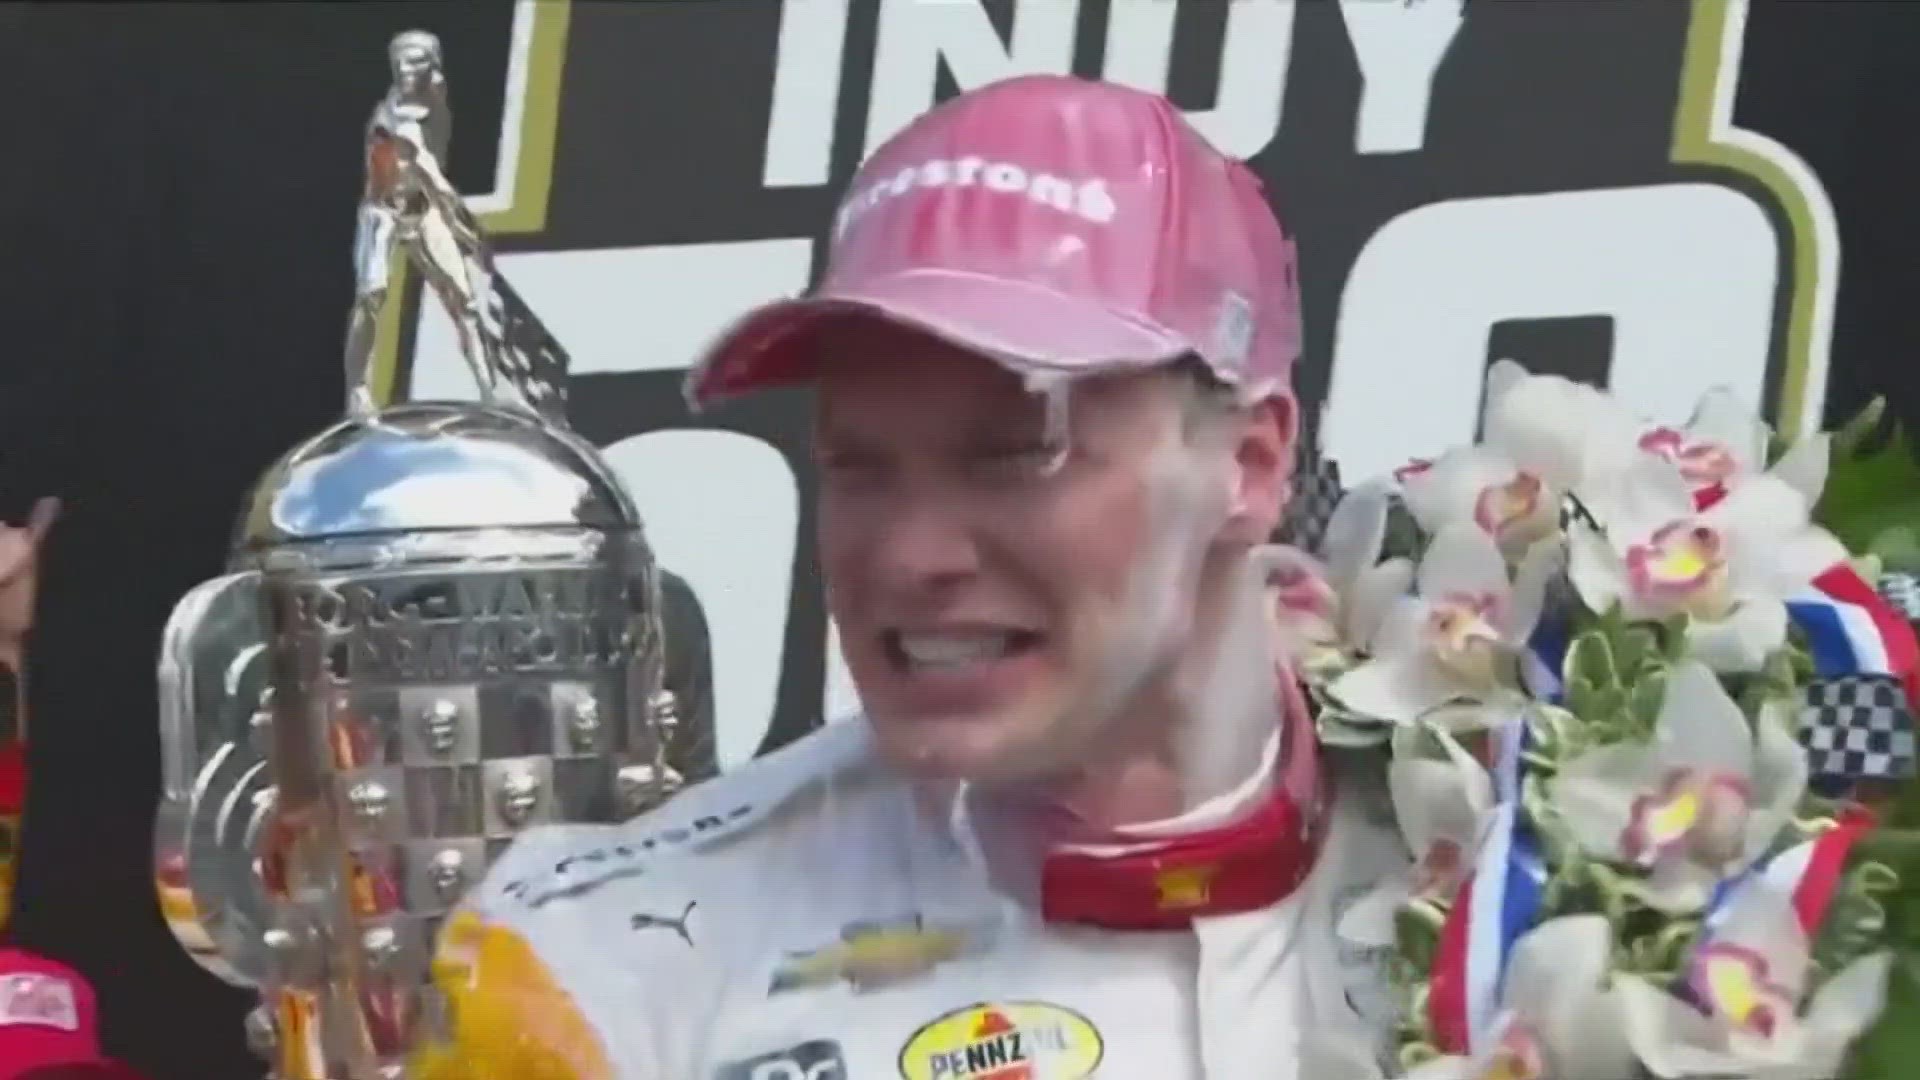 Newgarden gave team owner Roger Penske his 19th win and first since buying Indianapolis Motor Speedway.